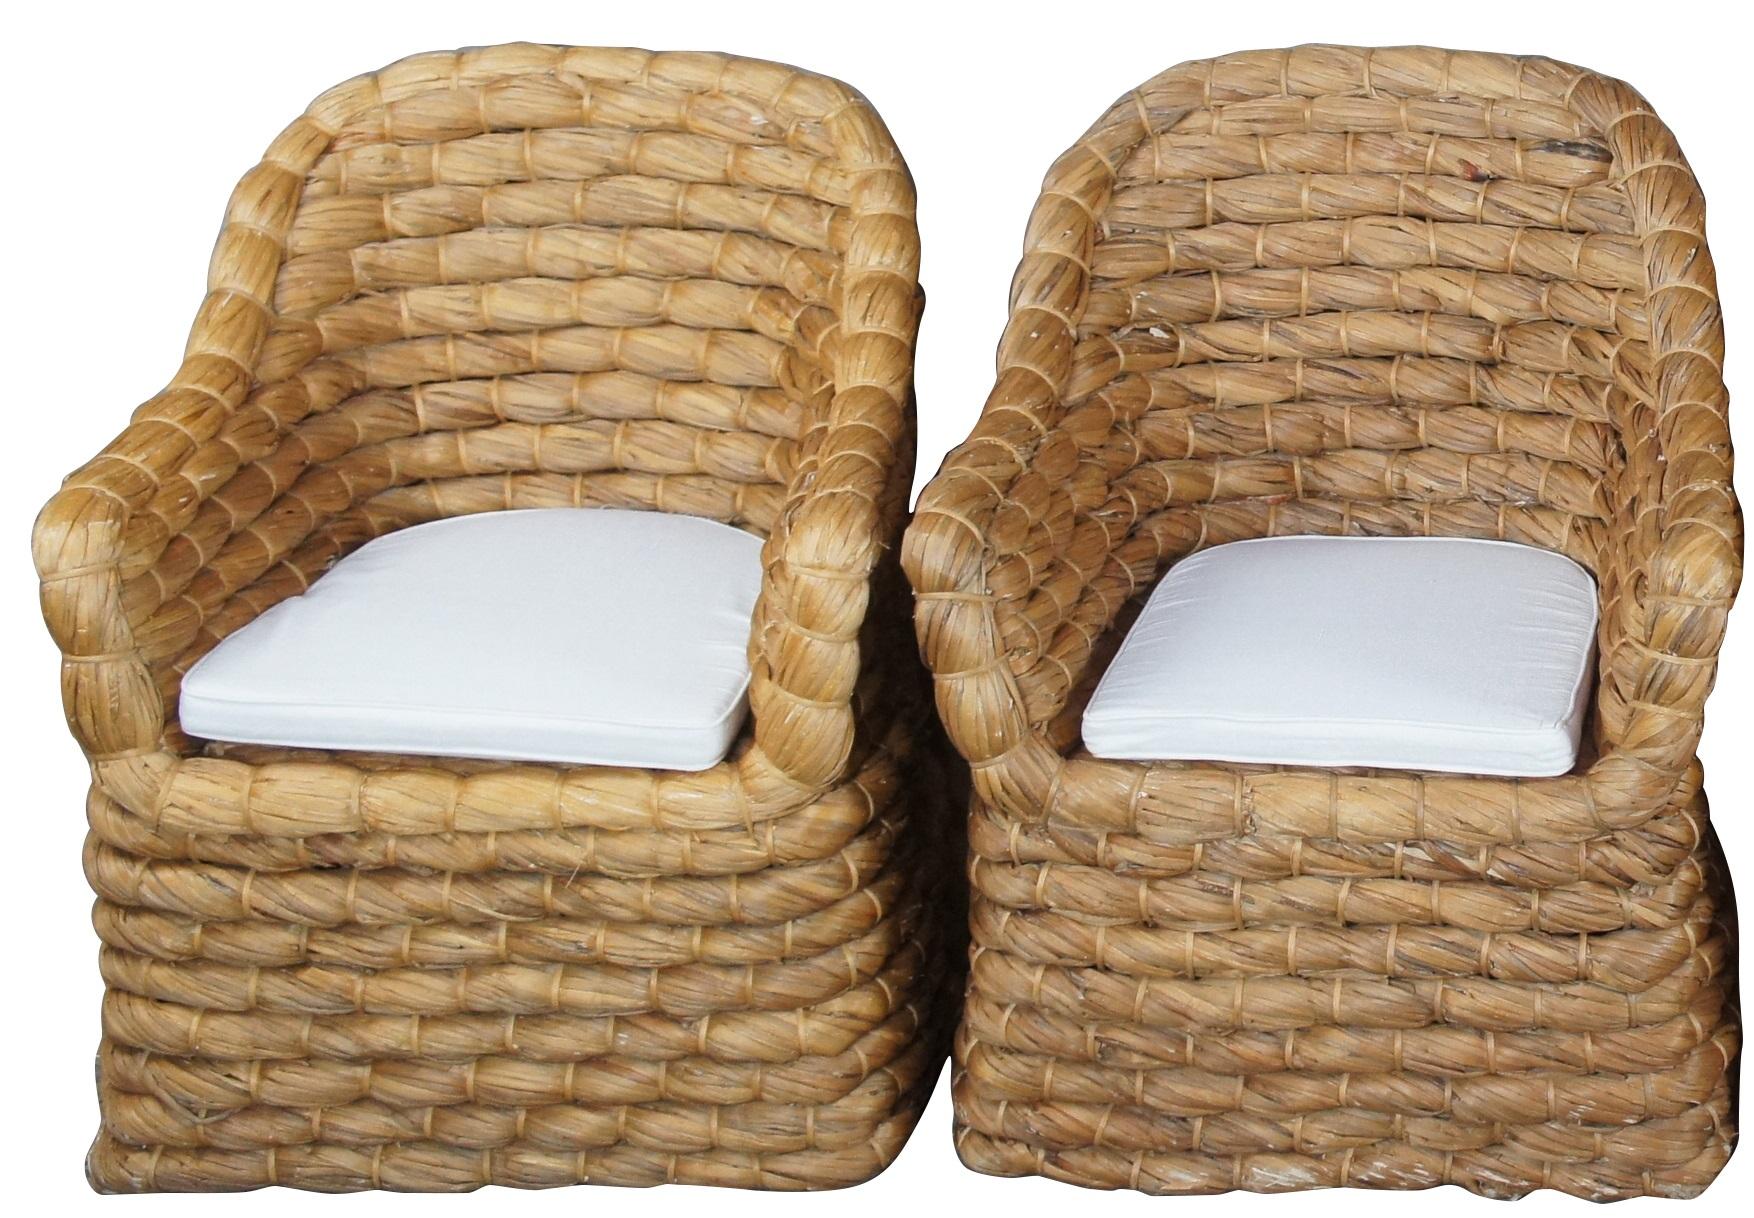 2 Ralph Lauren Joshua tree woven barrel back dining chairs Bohemian boho chic

2 Ralph Lauren Joshua tree chairs. Full of hearty texture and visual appeal, these cabana-style armchairs are crafted with natural lampakanay and fitted with a plush